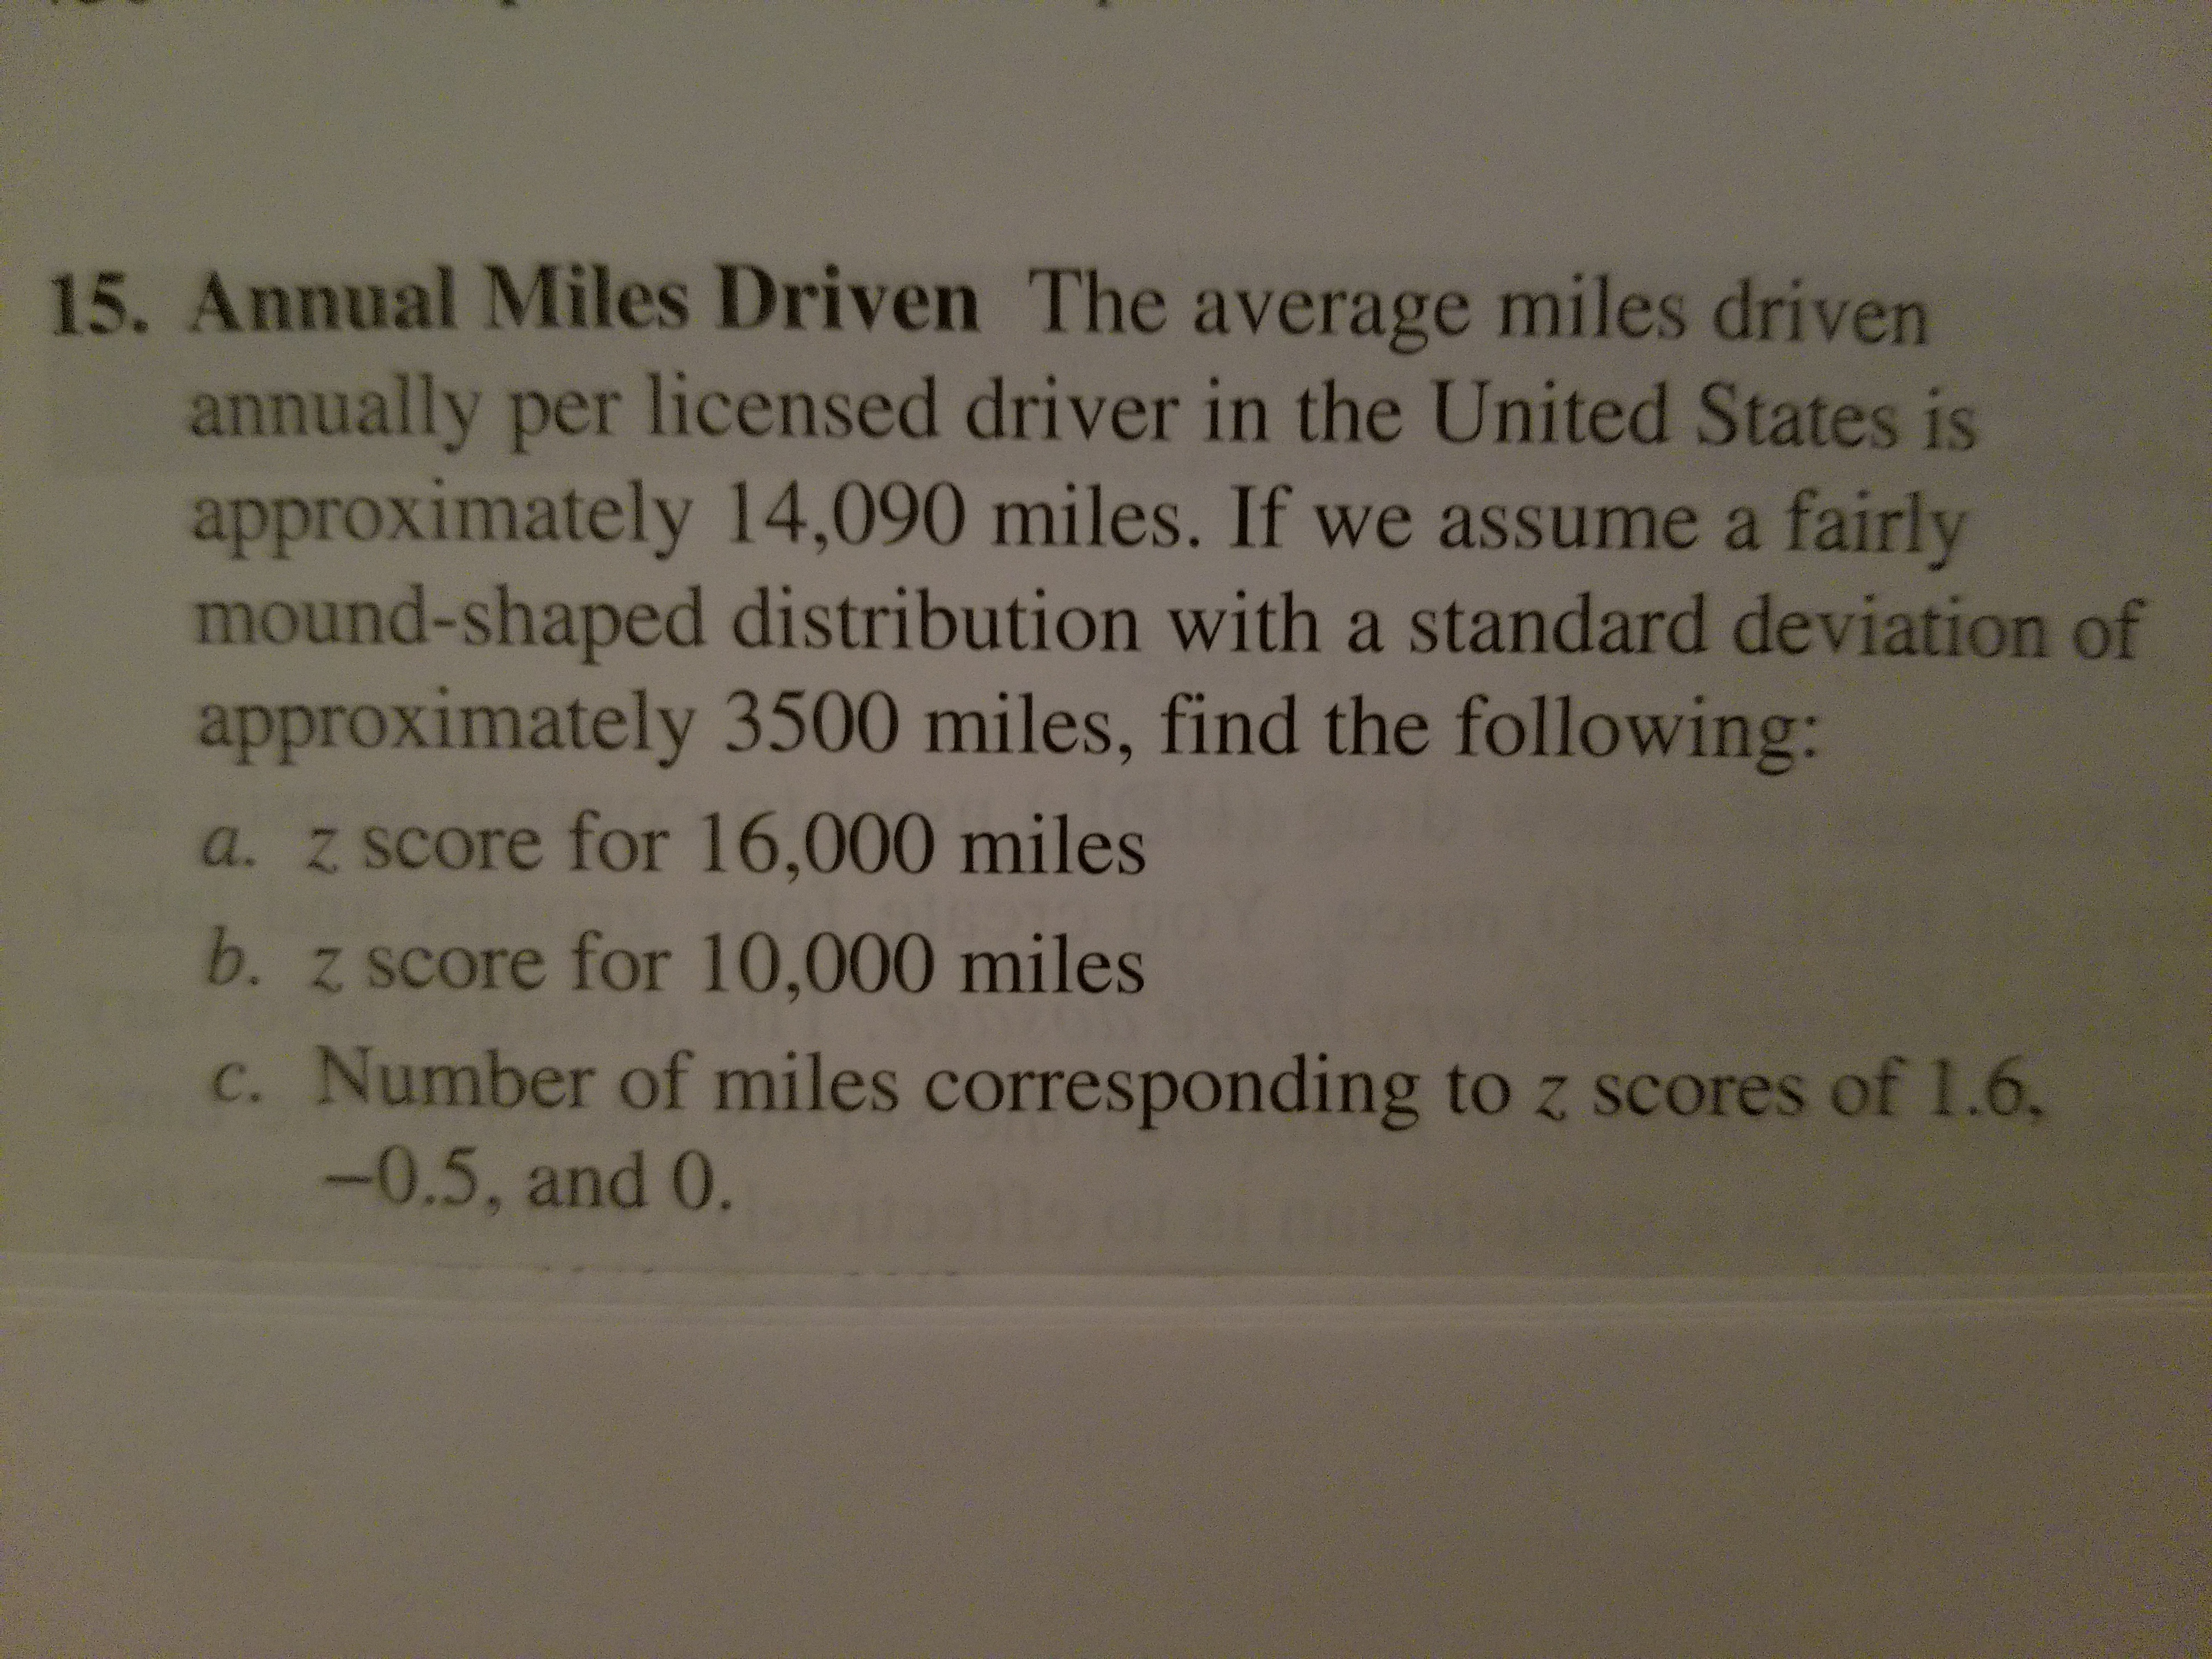 15. Annual Miles Driven The average miles driven
annually per licensed driver in the United States is
approximately 14,090 miles. If we assume a fairly
mound-shaped distribution with a standard deviation of
approximately 3500 miles, find the following:
a. z score for 16,000 miles
b. z score for 10,000 miles
c. Number of miles corresponding to z scores of 1.6,
-0.5, and 0.
